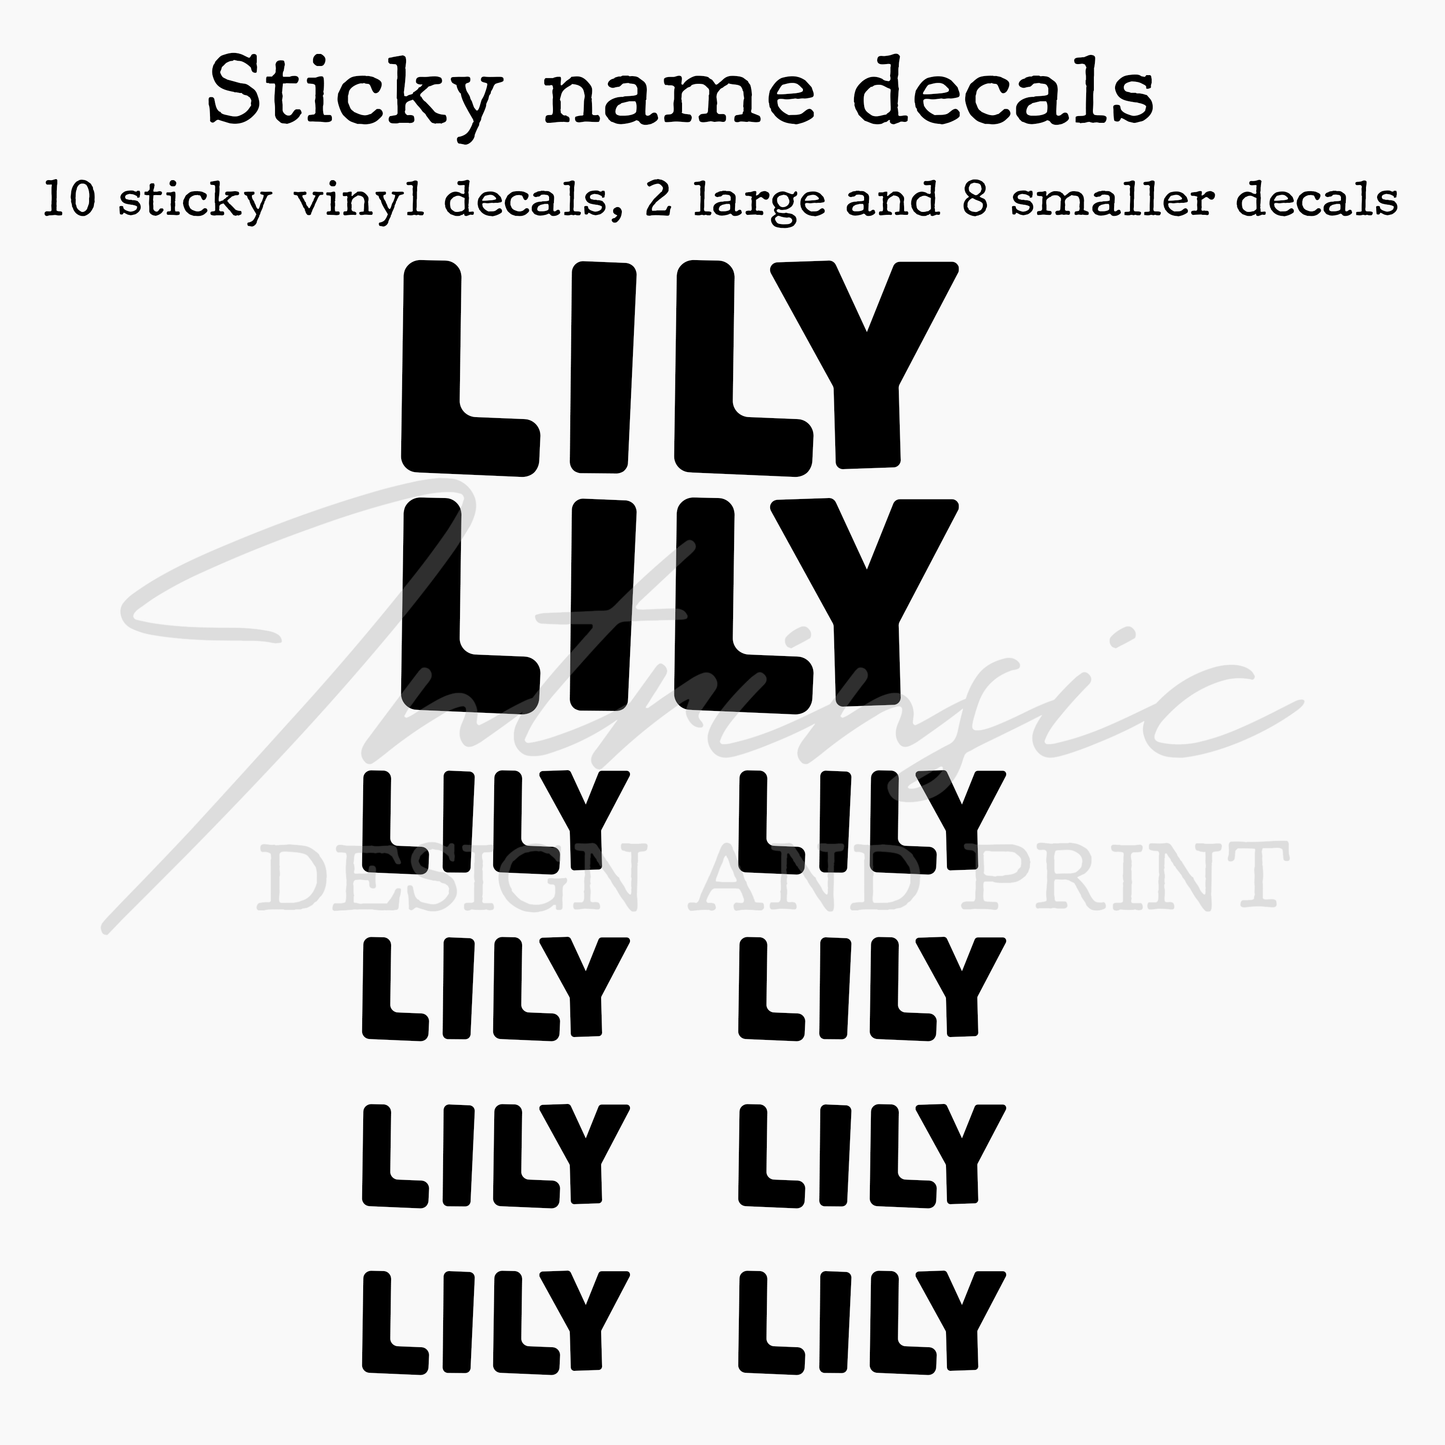 Sticky name decals